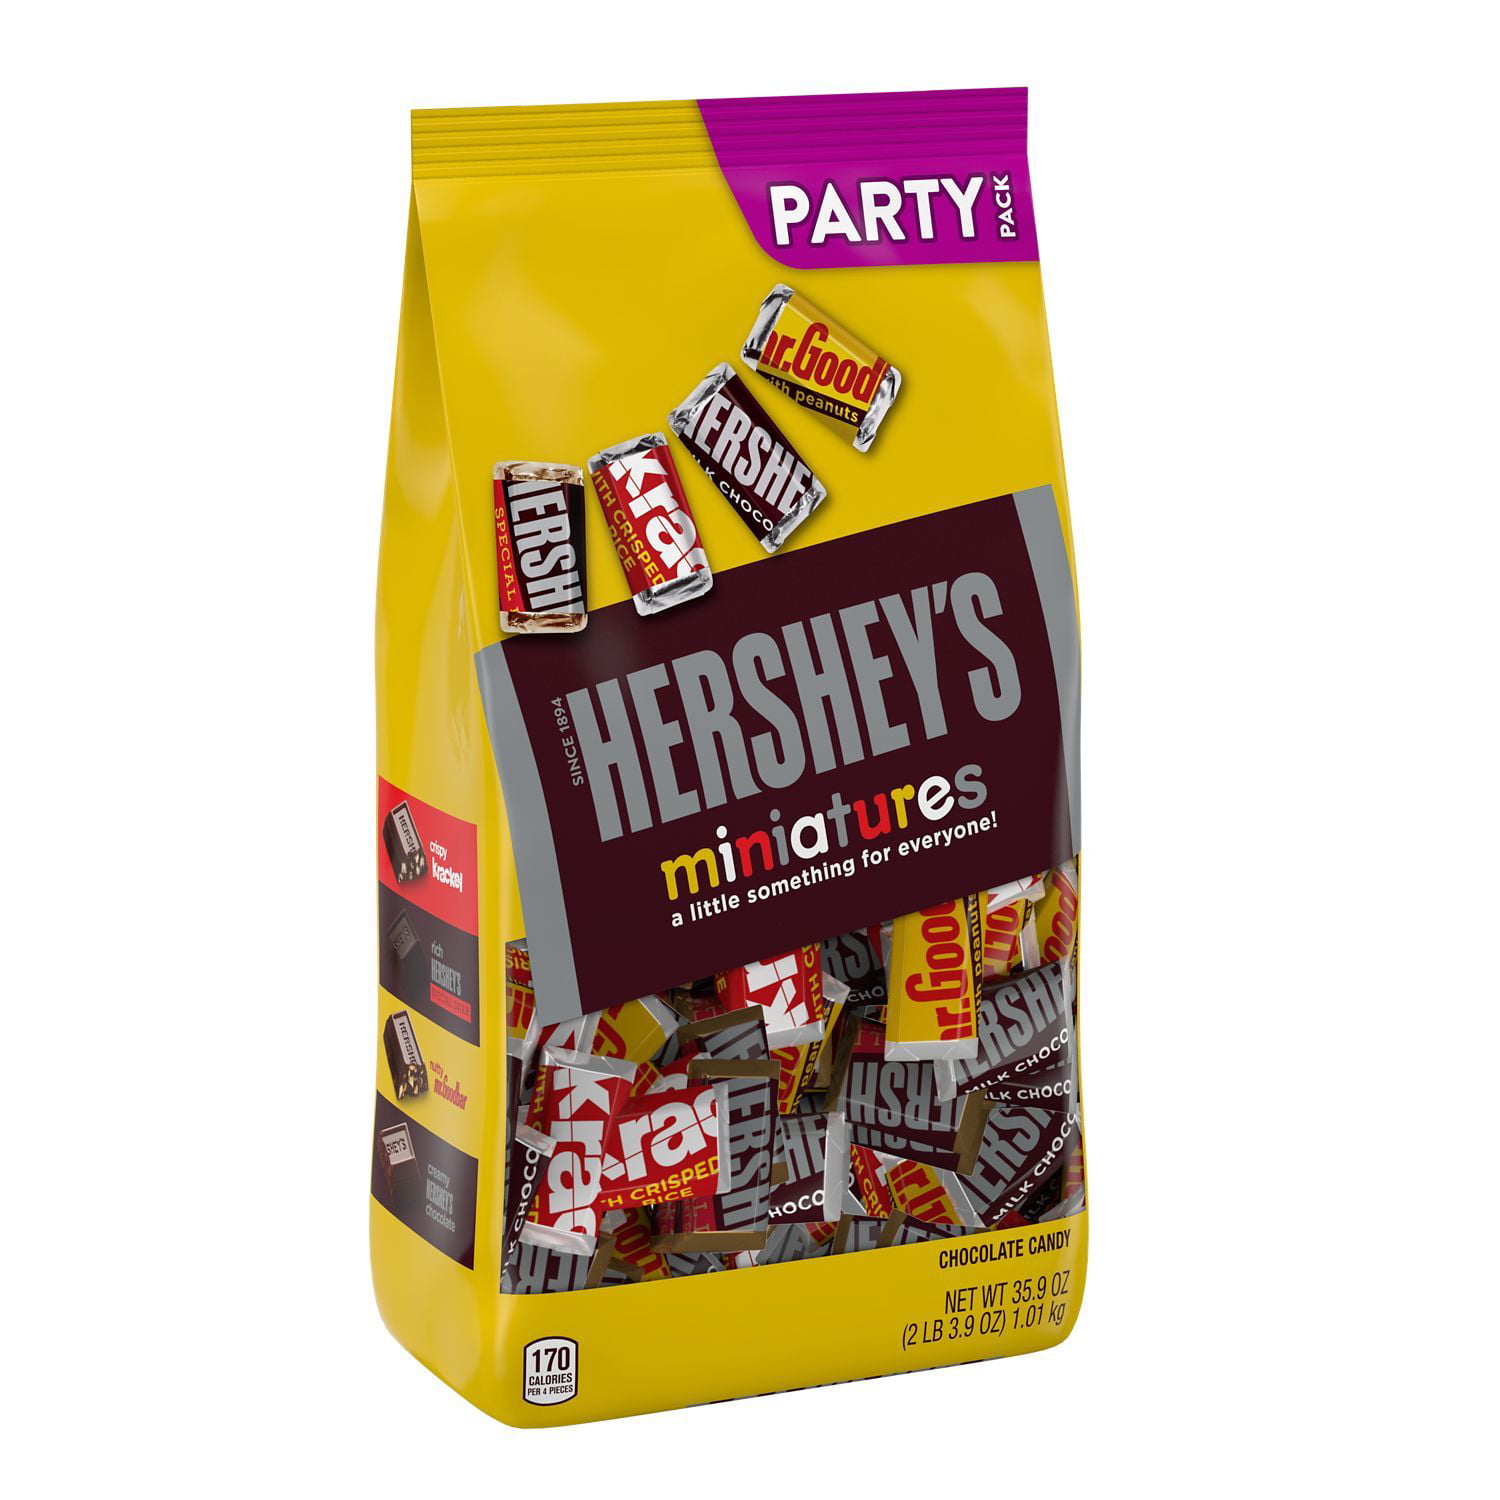 HERSHEY'S, Miniatures Assorted Chocolate Candy, Valentine's Day, 35.9 oz, Bulk Party Bag